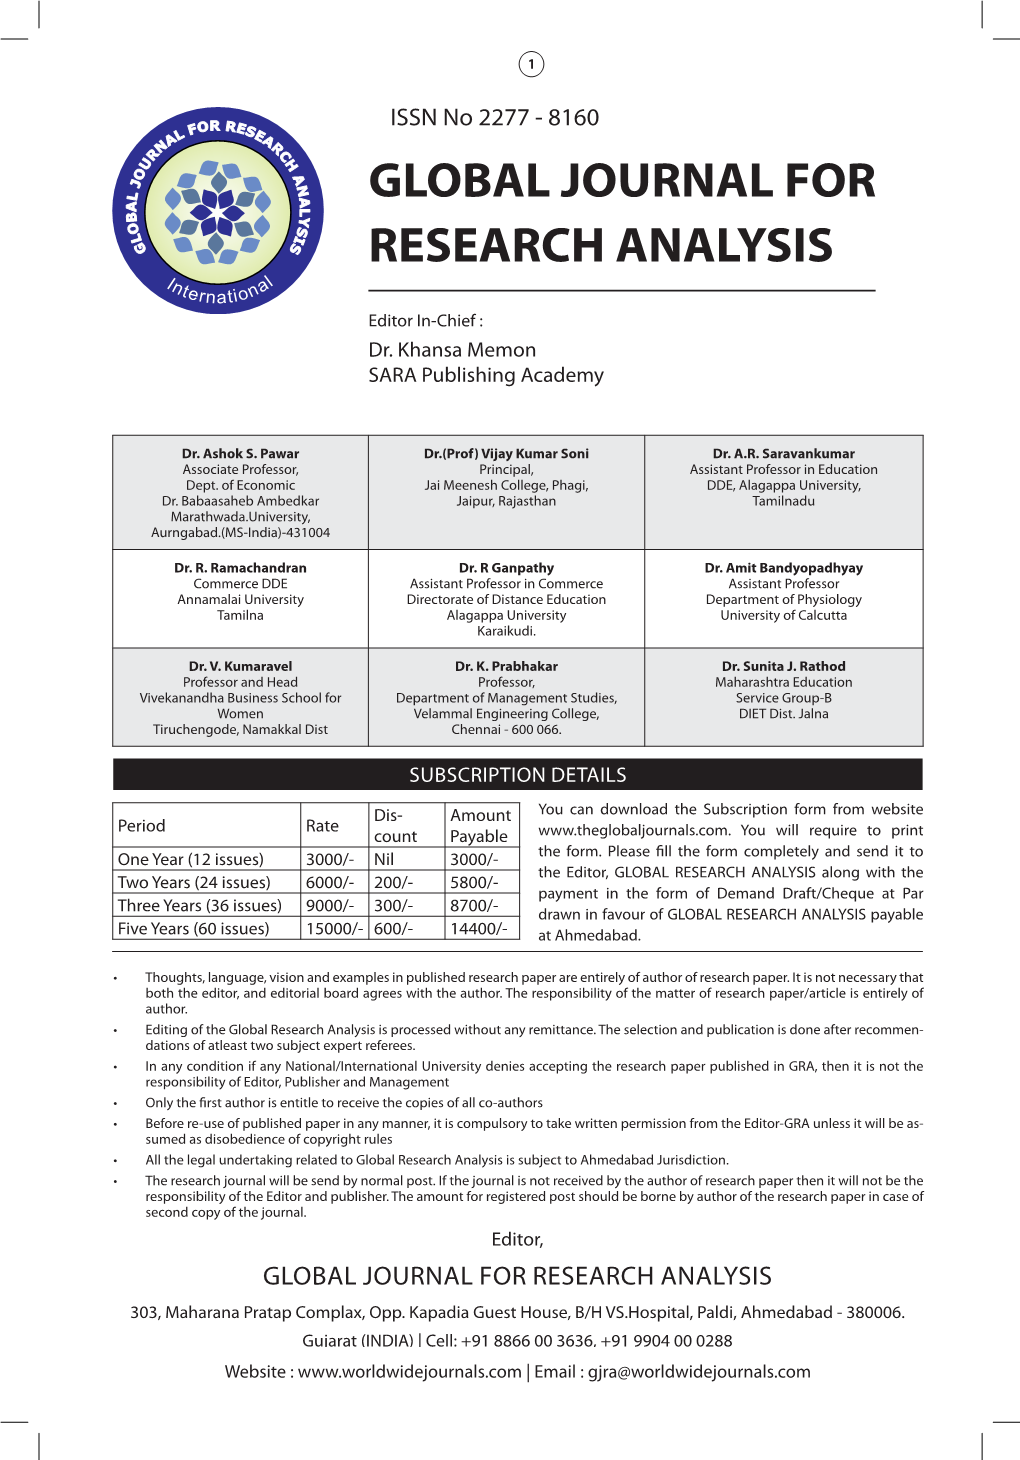 Global Journal for Research Analysis